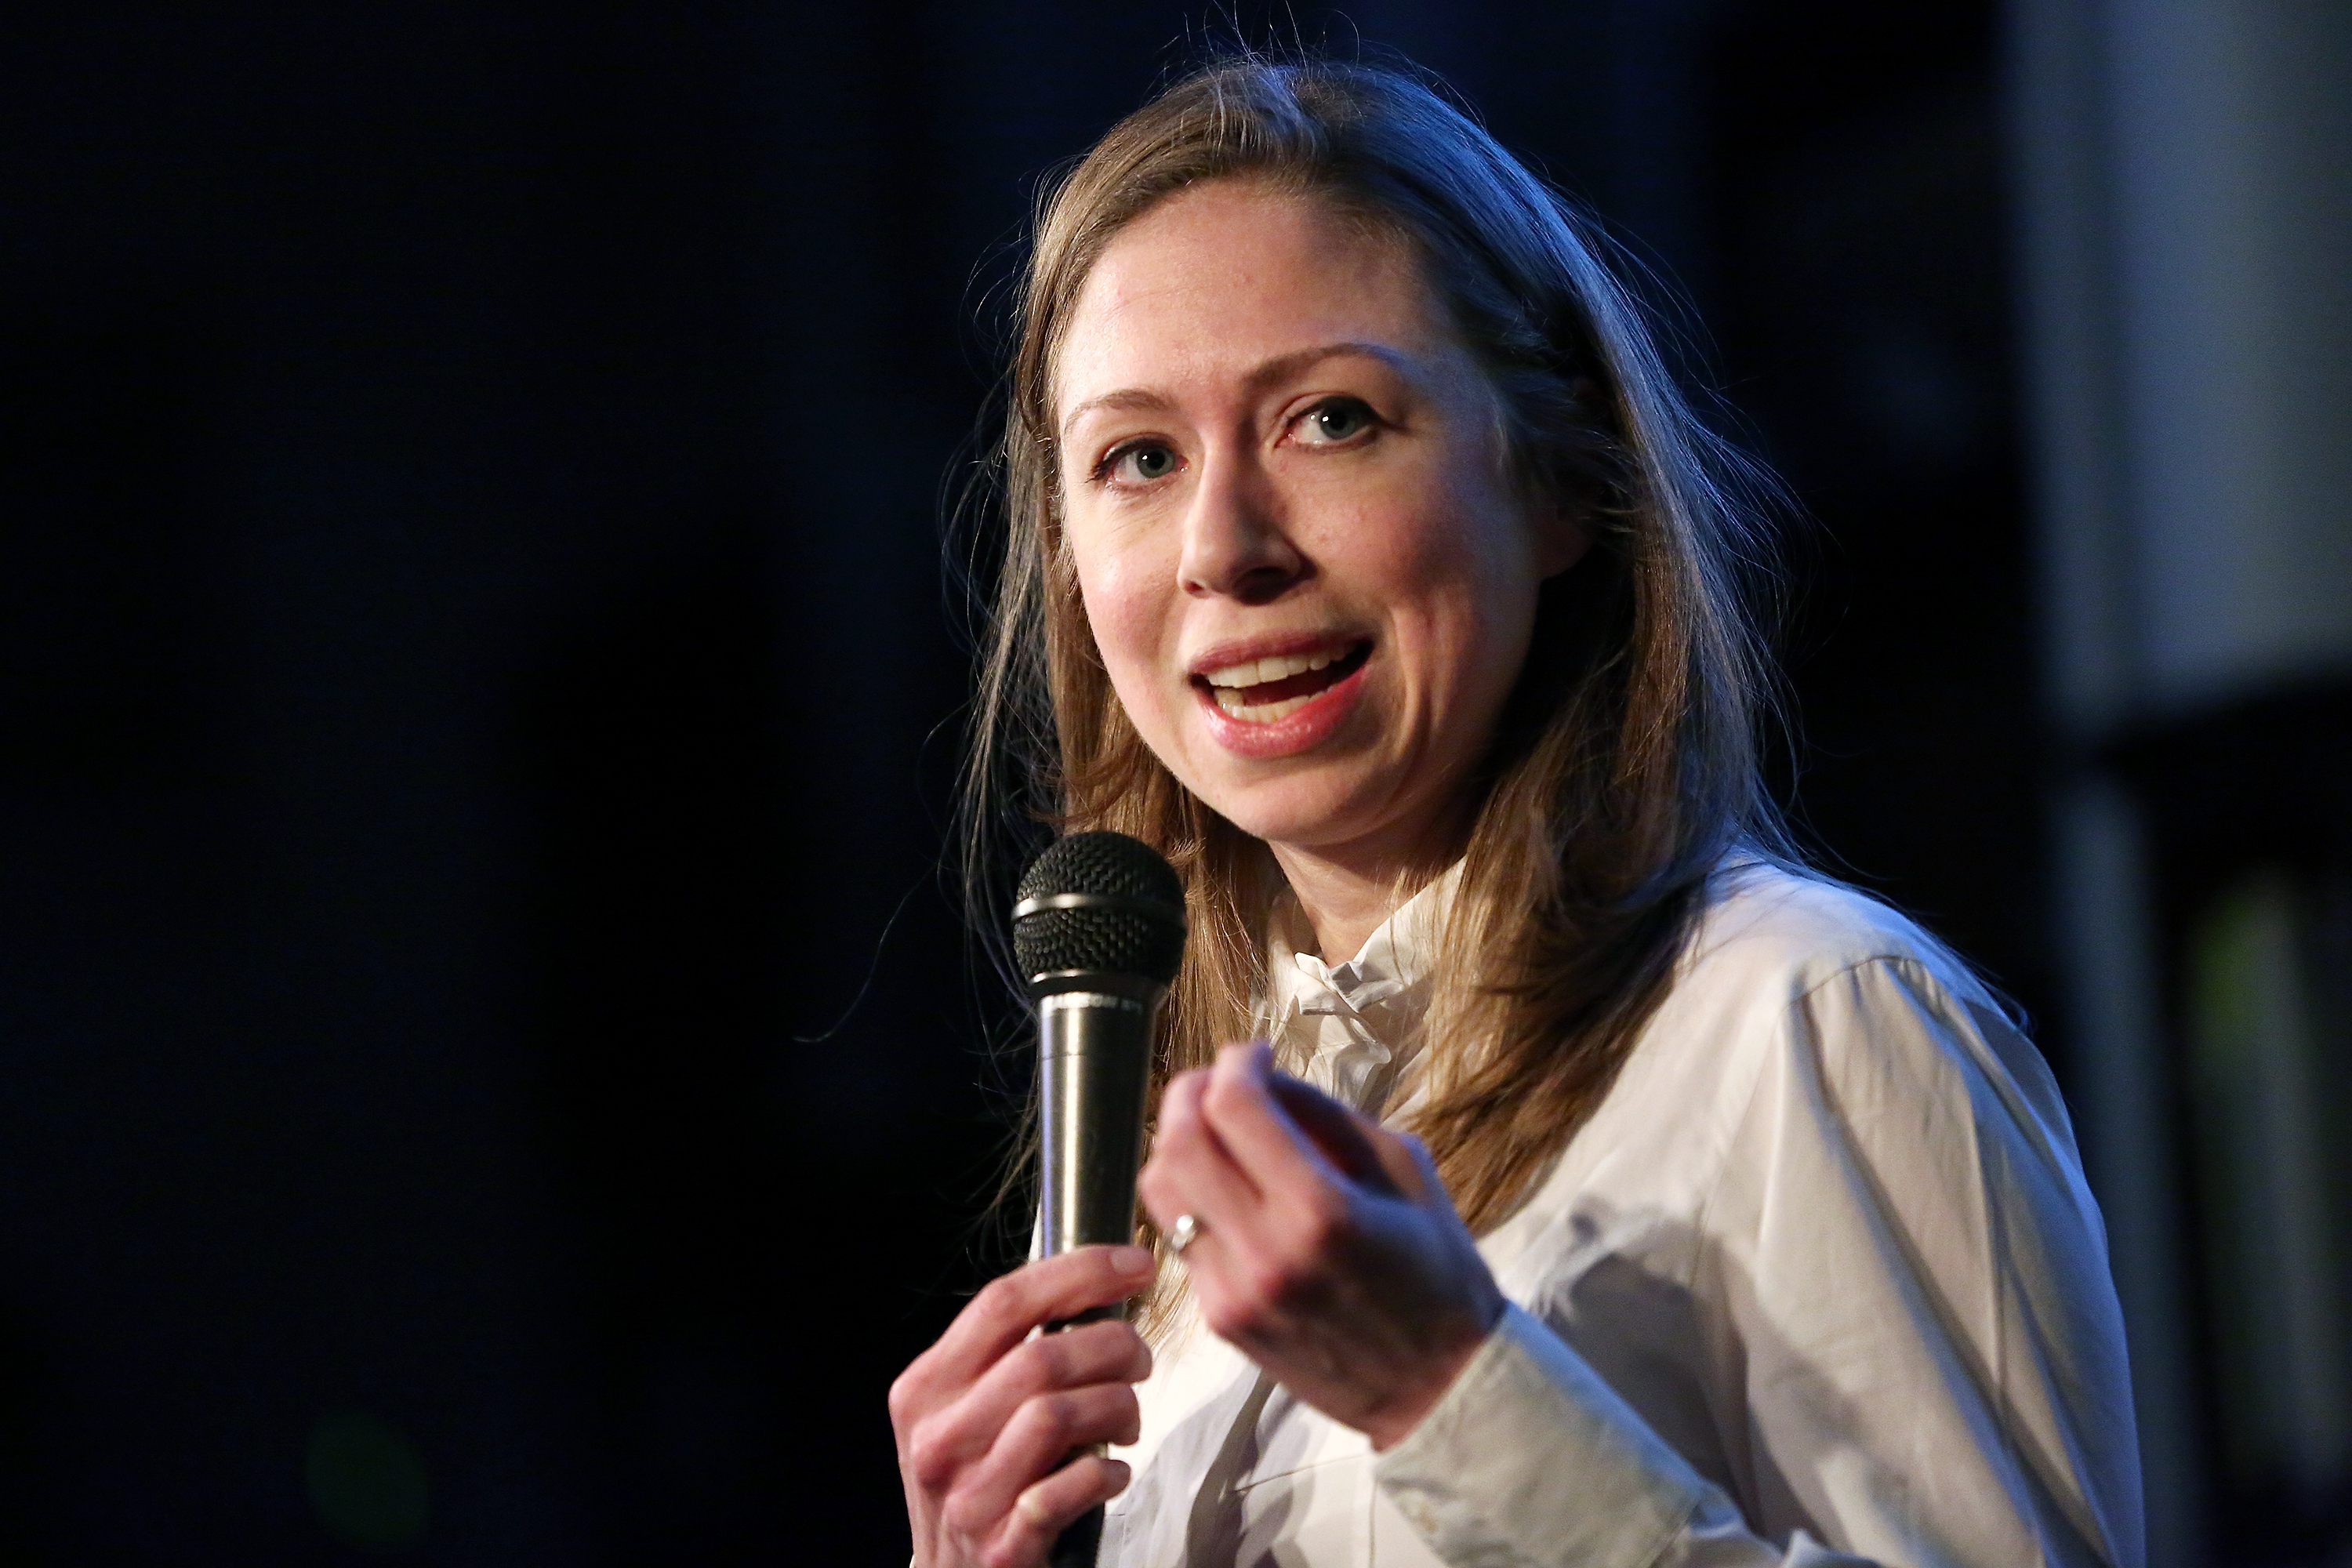 Chelsea Clinton Signs Copies Of Her New Book "It's Your World"